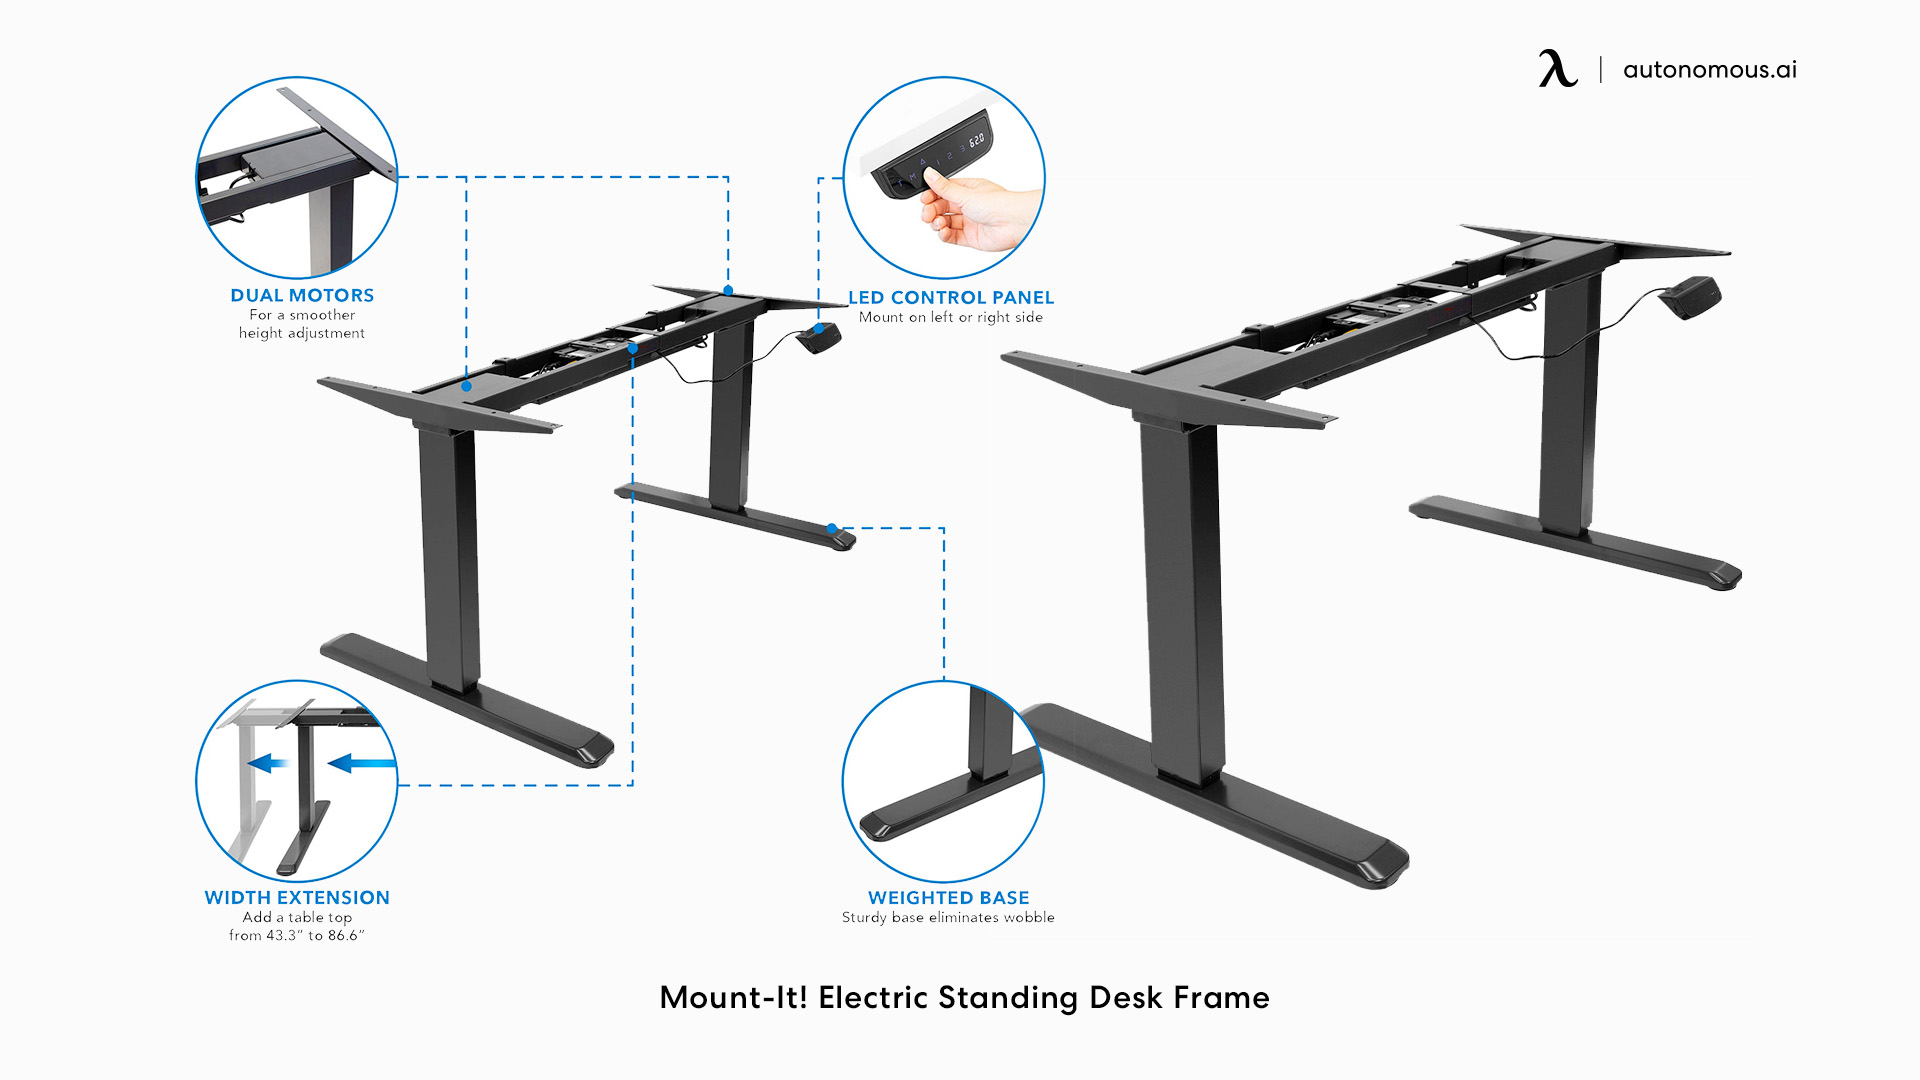 What Is a Mount-It! Standing Desk?